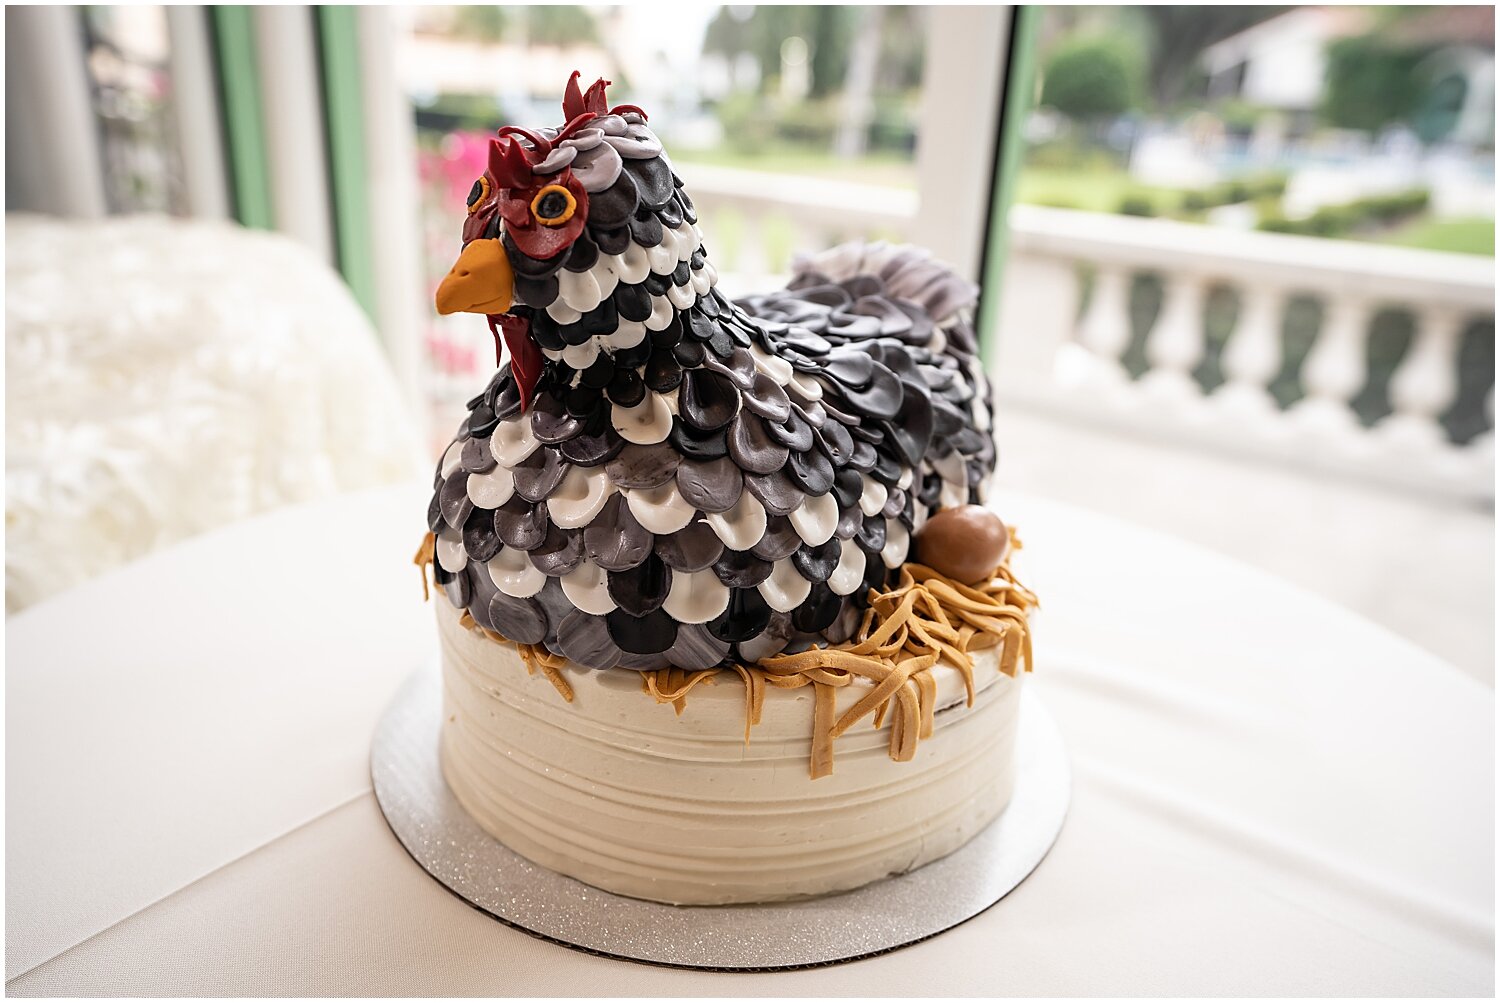  Rooster wedding cake  